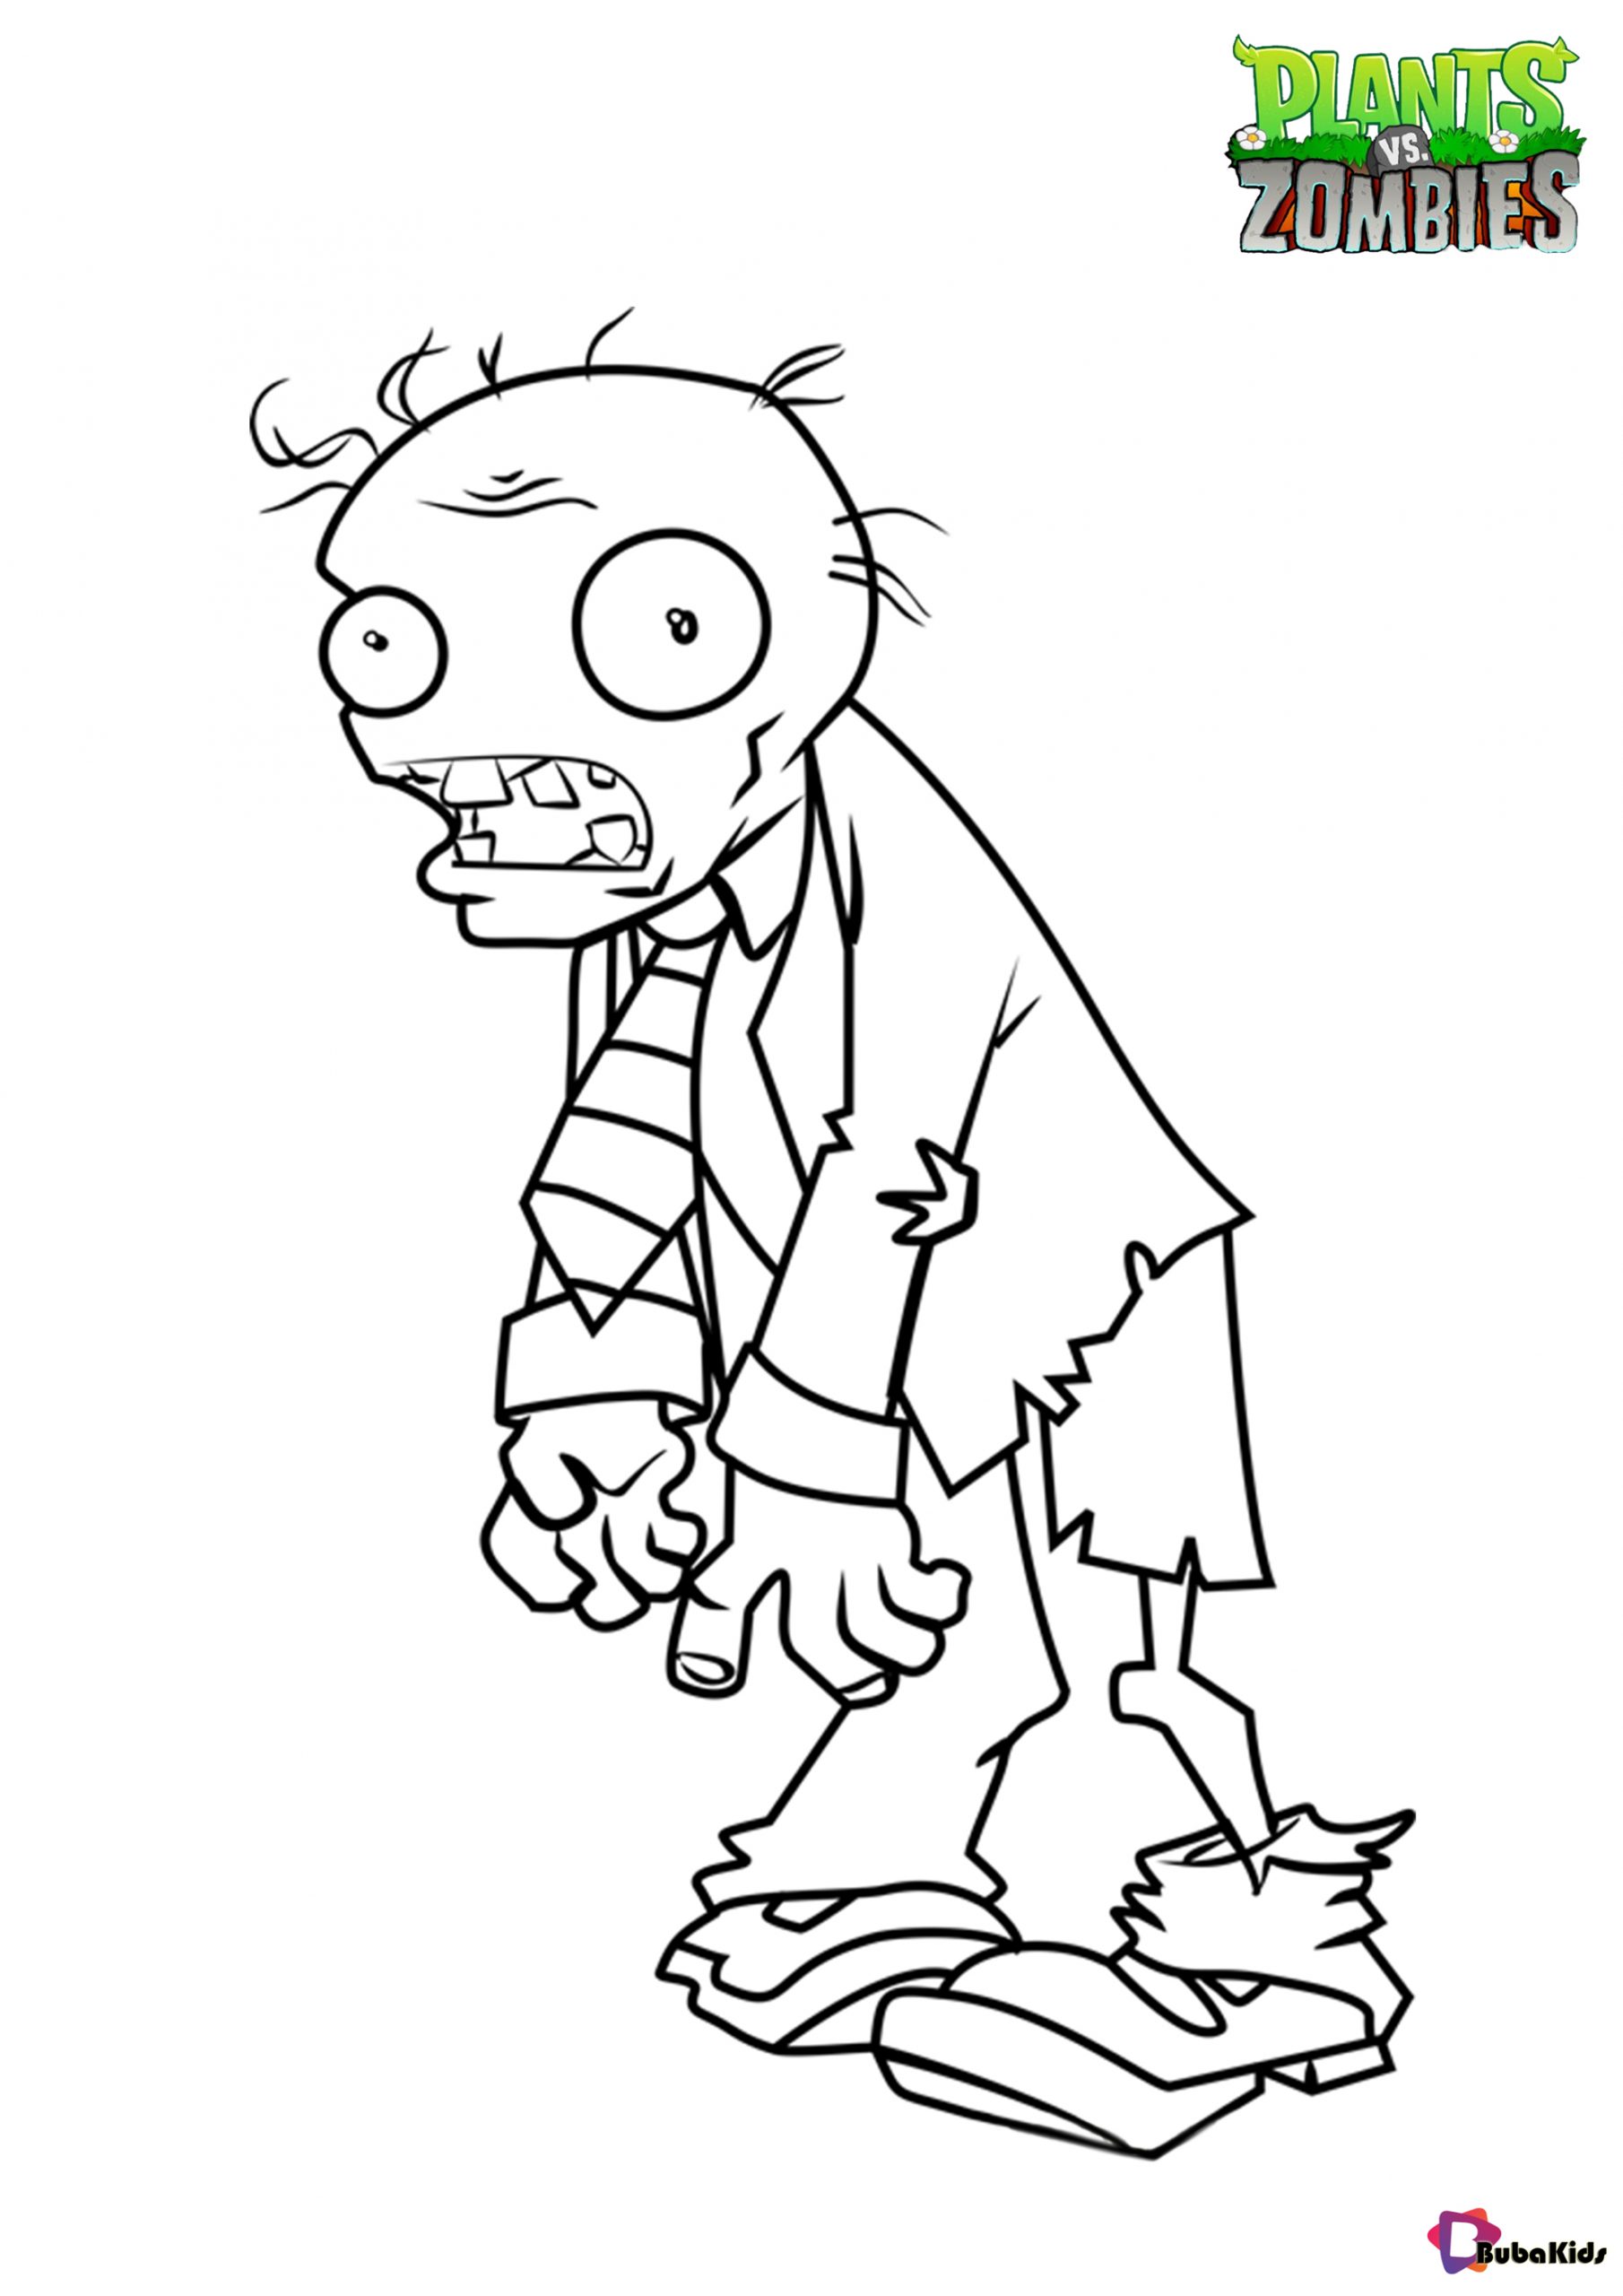 Free download plants vs Zombies coloring page